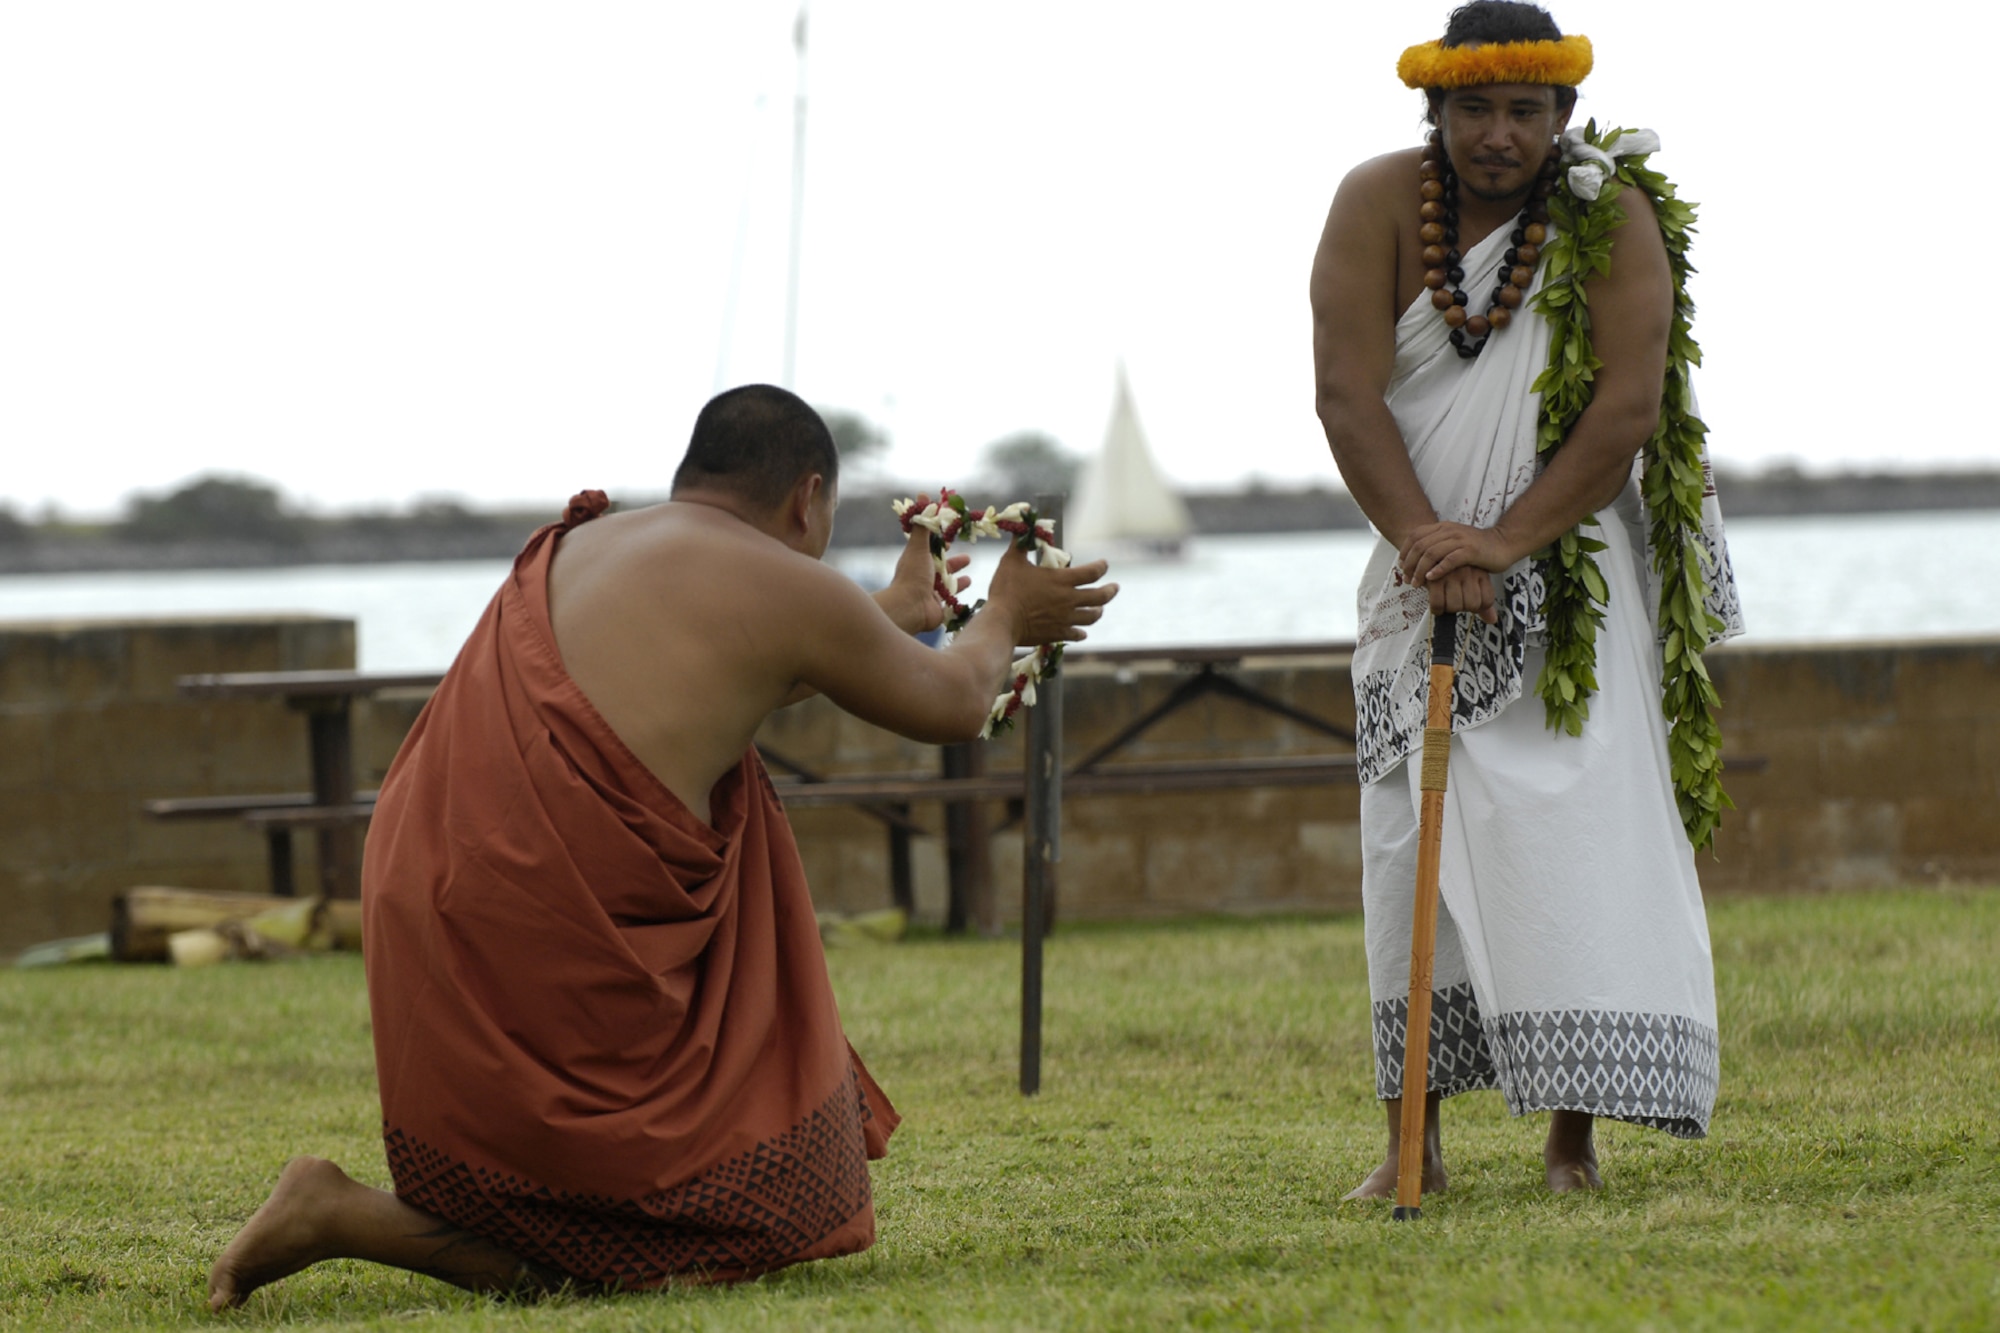 HICKAM AIR FORCE BASE, Hawaii - Braven Canibog, Makahiki protocol officer, watches as Kanoa Nelson offers a lei as an offering to Lono during the 7th Annual Kapuaikaula (Hickam) Makahiki (Thanksgiving) festival Nov. 14. Local Hawaiian and Hickam officials gathered at Hickam Harbor for the ancient ceremony and festival. The festival involved a ceremonial arrival in canoes, spiritual offerings, five skills competitions and a feast to end the day. According to history texts, the Makahiki was started to honor Lono, the Hawaiian guardian of agriculture, rain, health and peace. The offerings to Lono during the Makahiki were taken to the burial site. (DoD photo by U.S.  Air Force Tech Sgt. Cohen A. Young)